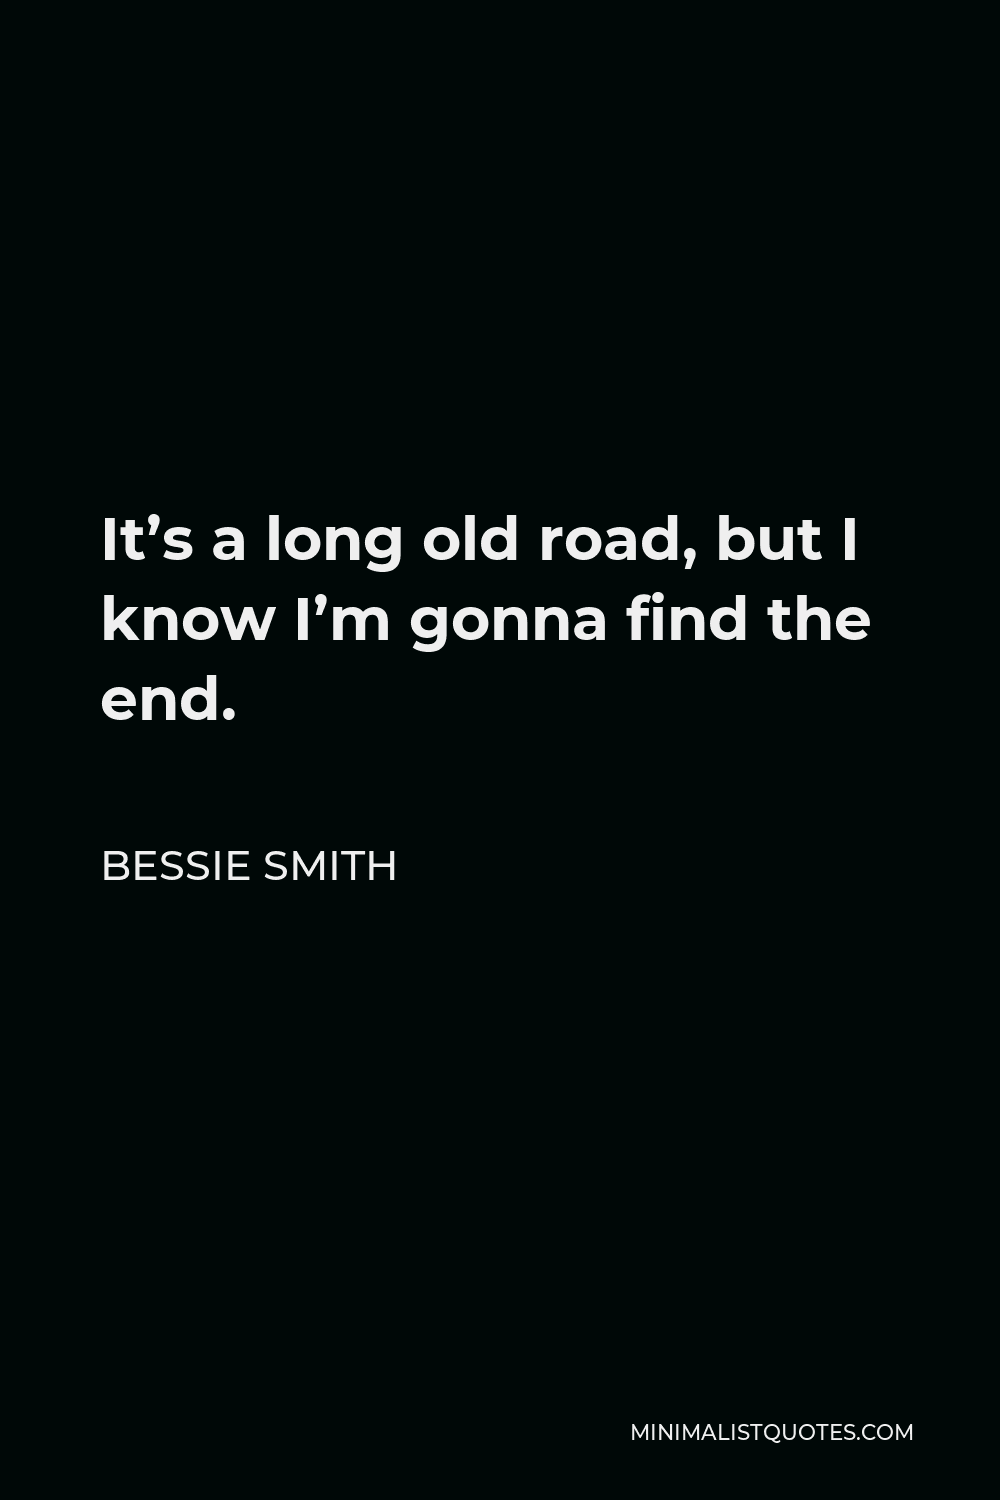 Bessie Smith Quote - It’s a long old road, but I know I’m gonna find the end.